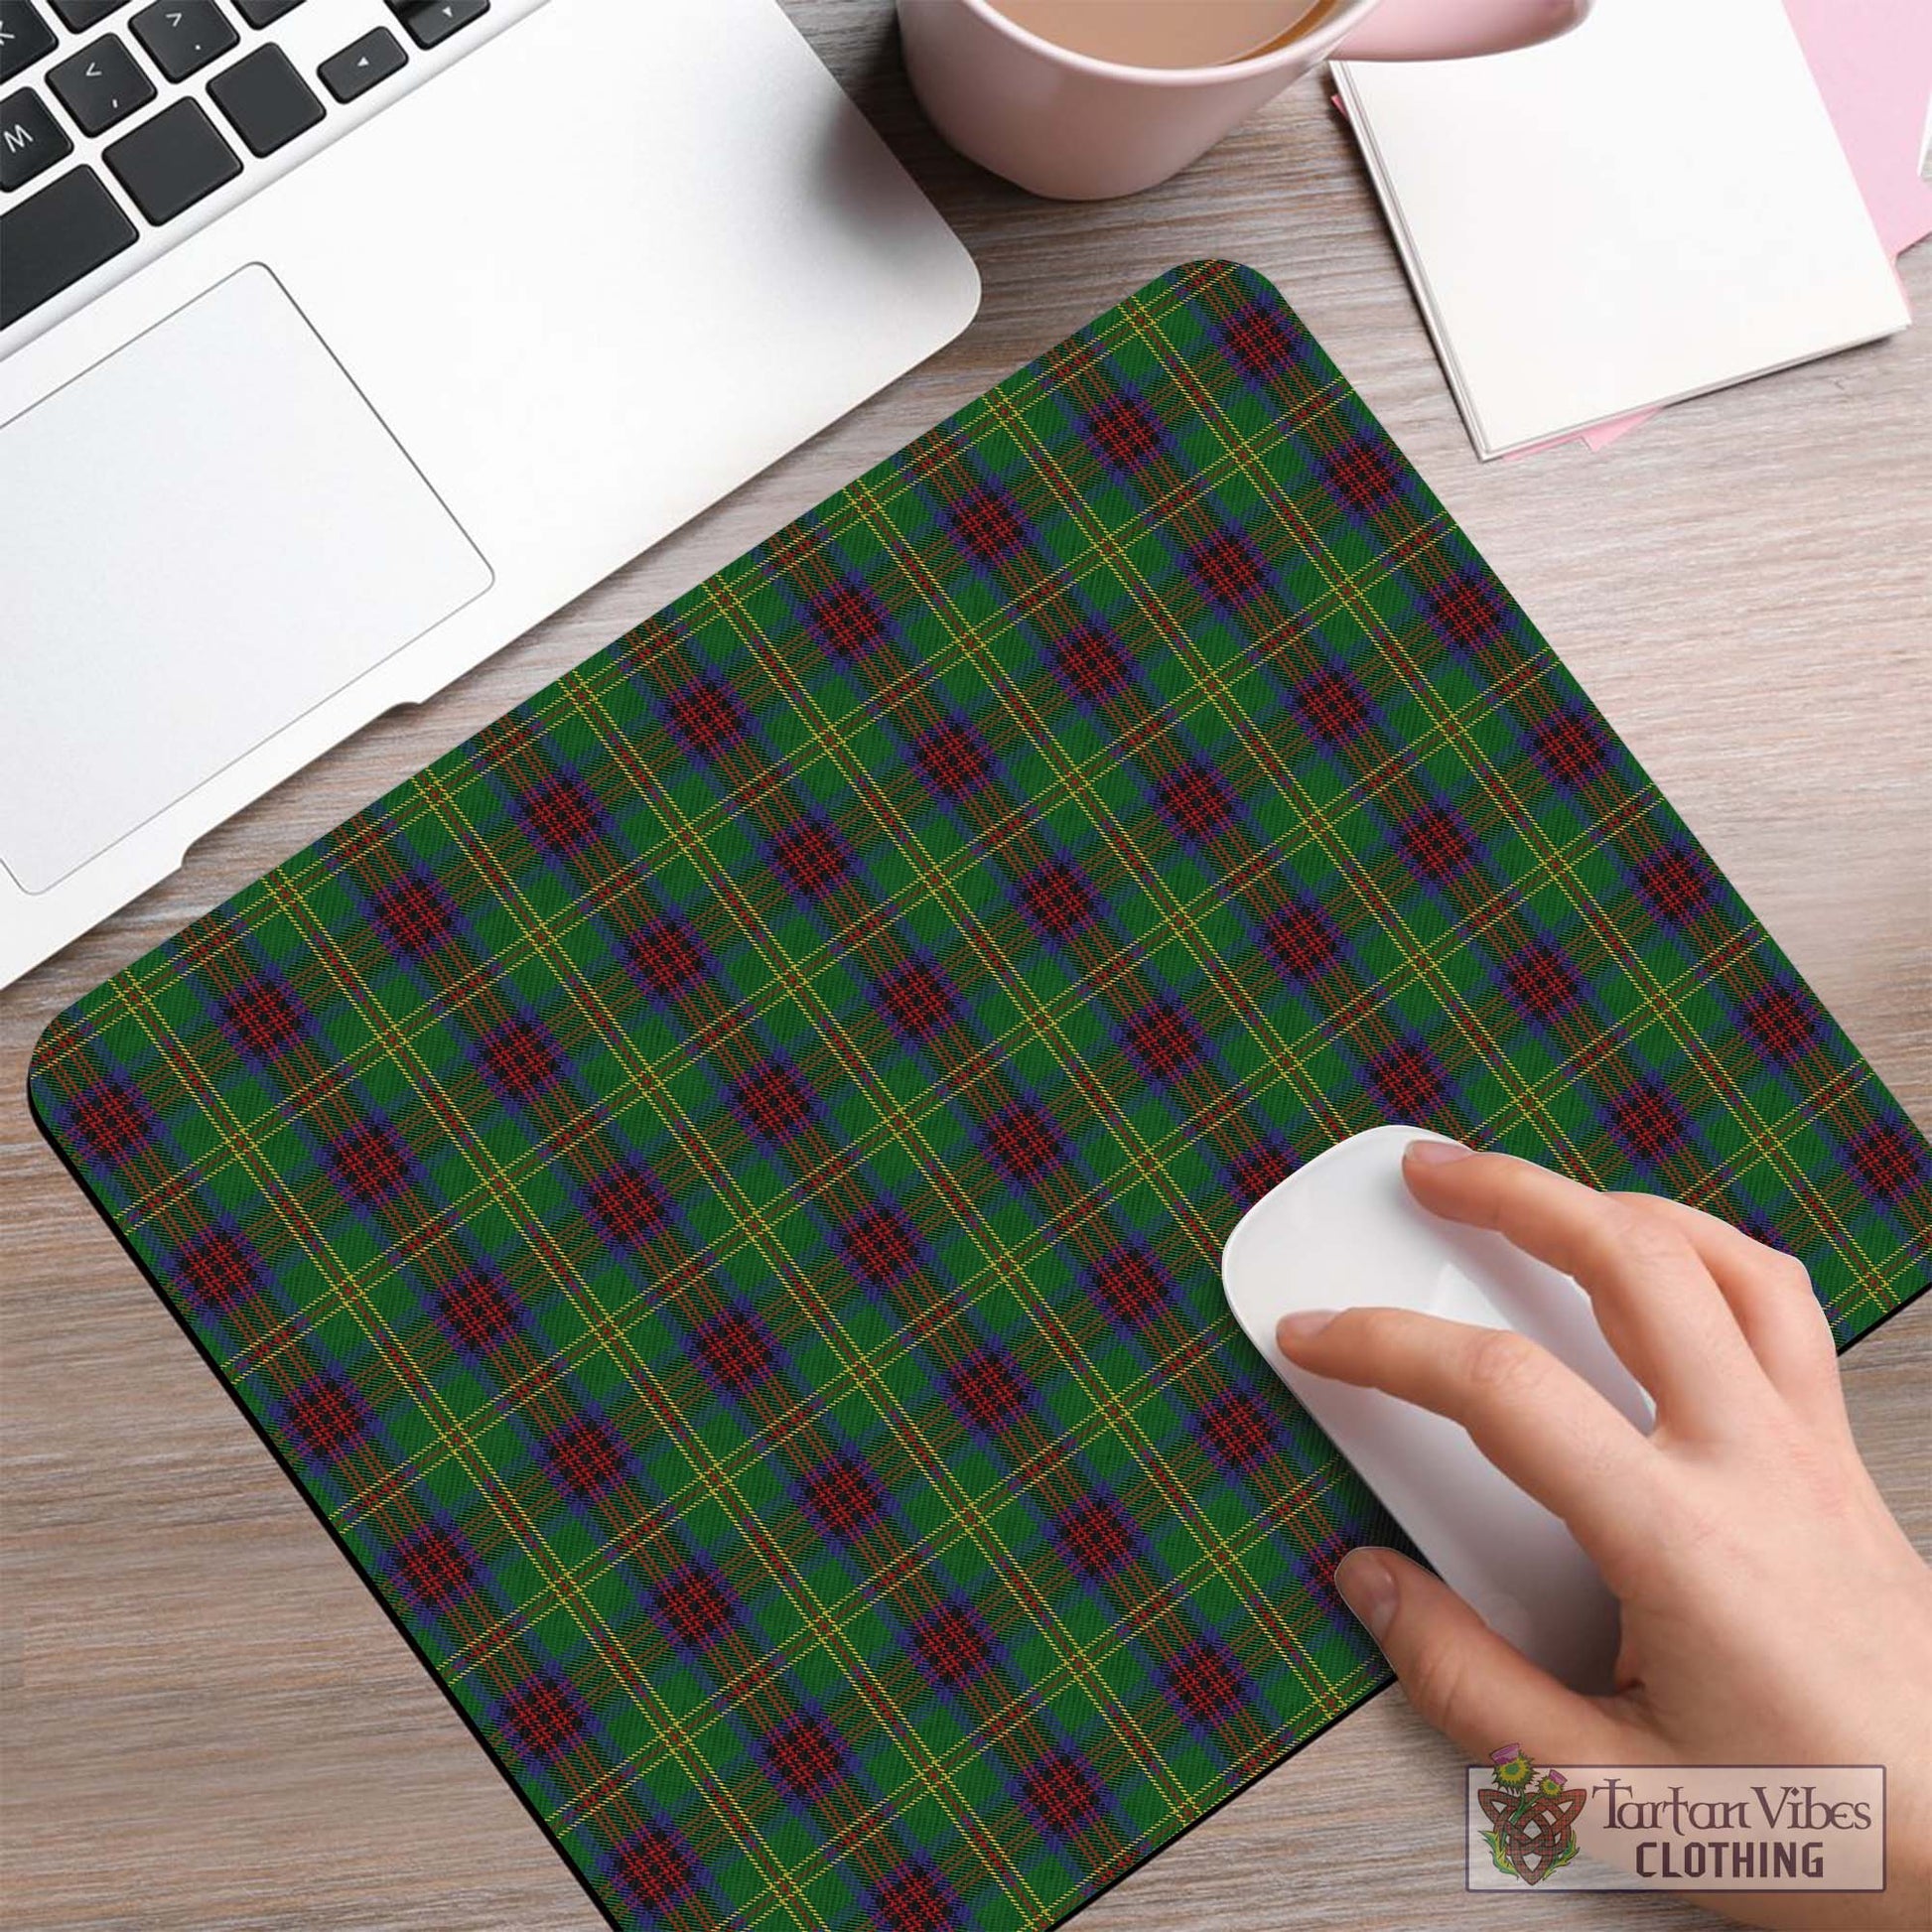 Tartan Vibes Clothing Connolly Hunting Tartan Mouse Pad